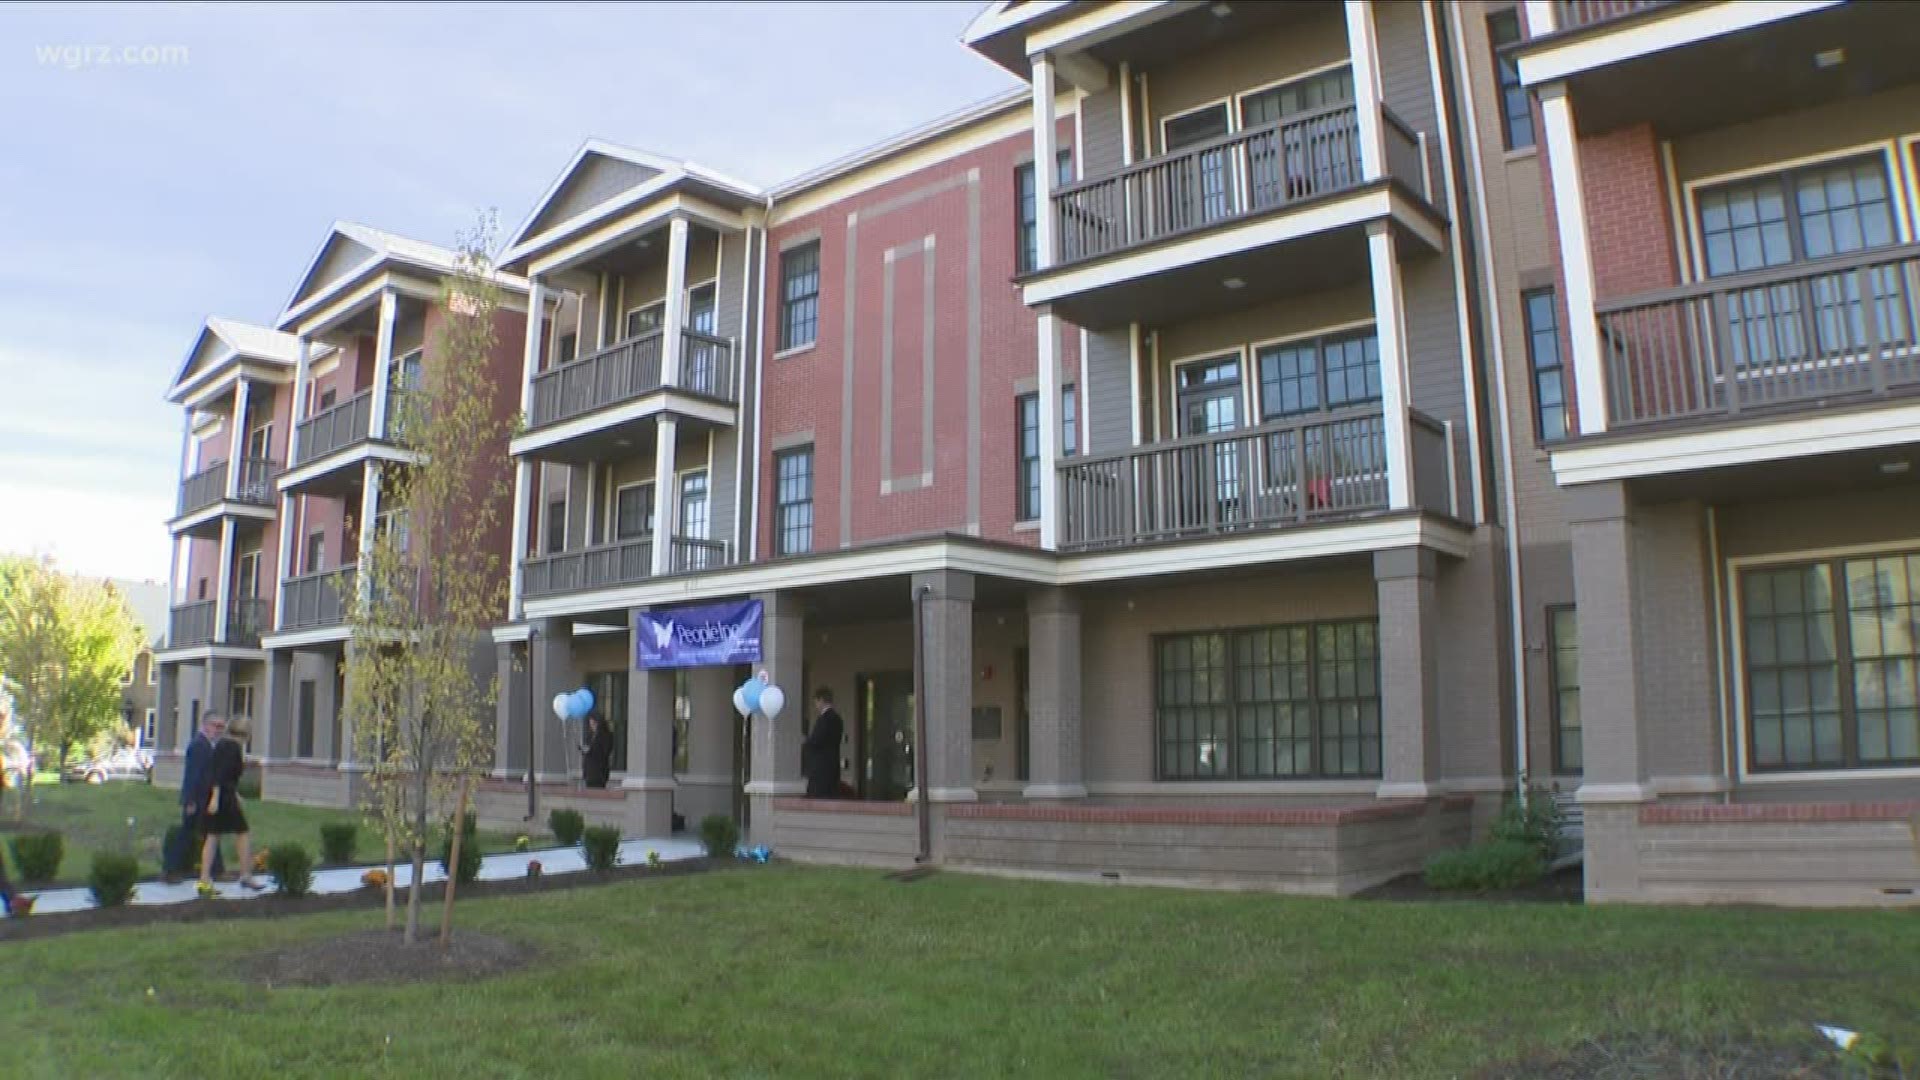 Elected officials cut the ribbon on a new affordable senior housing development today. The nearly 12 million dollar project created 37 new apartments on Linwood Ave.